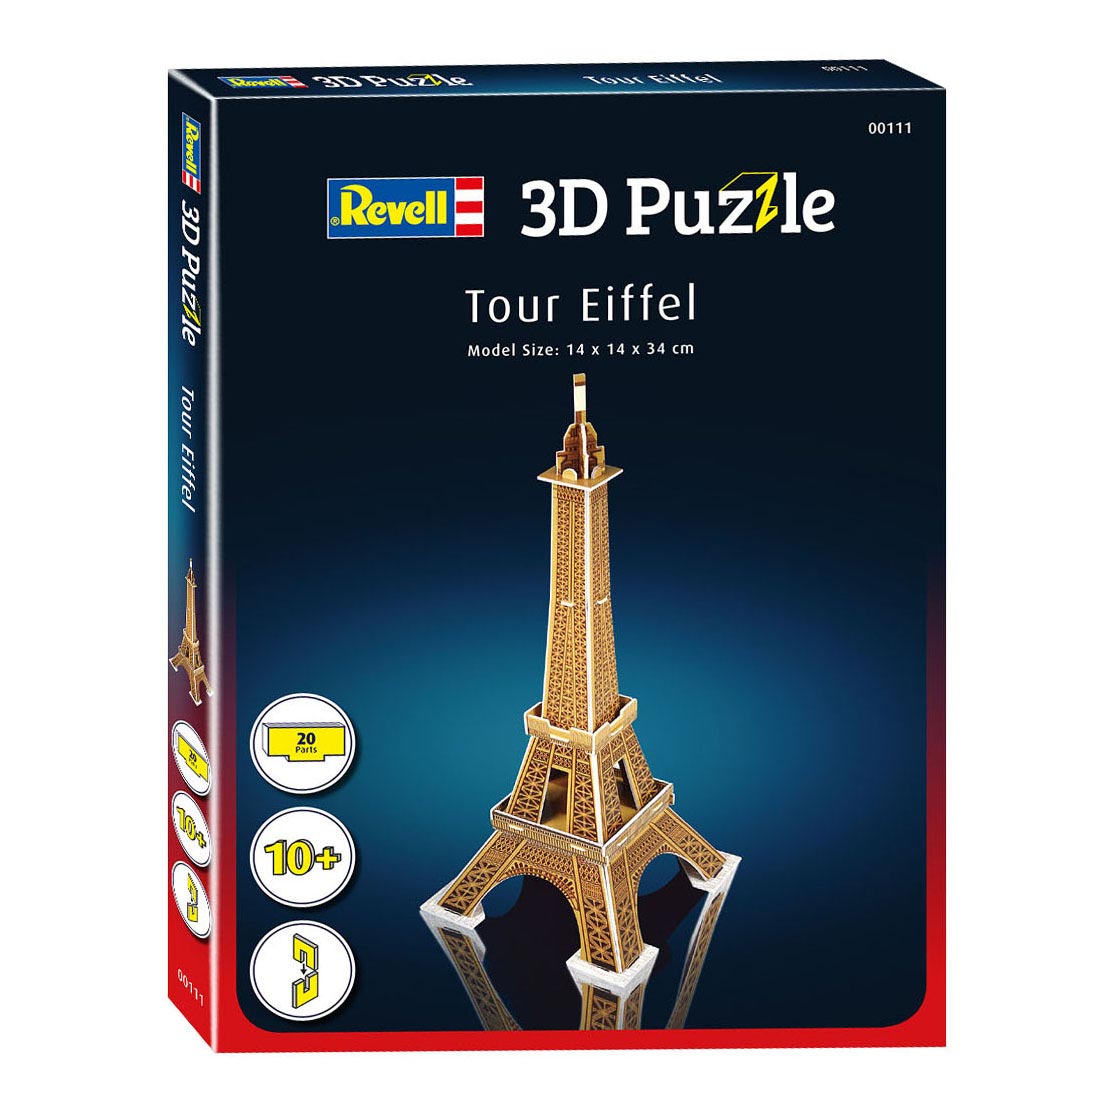 Eiffel Tower by Night, 3D Puzzle Buildings, 3D Puzzles, Products